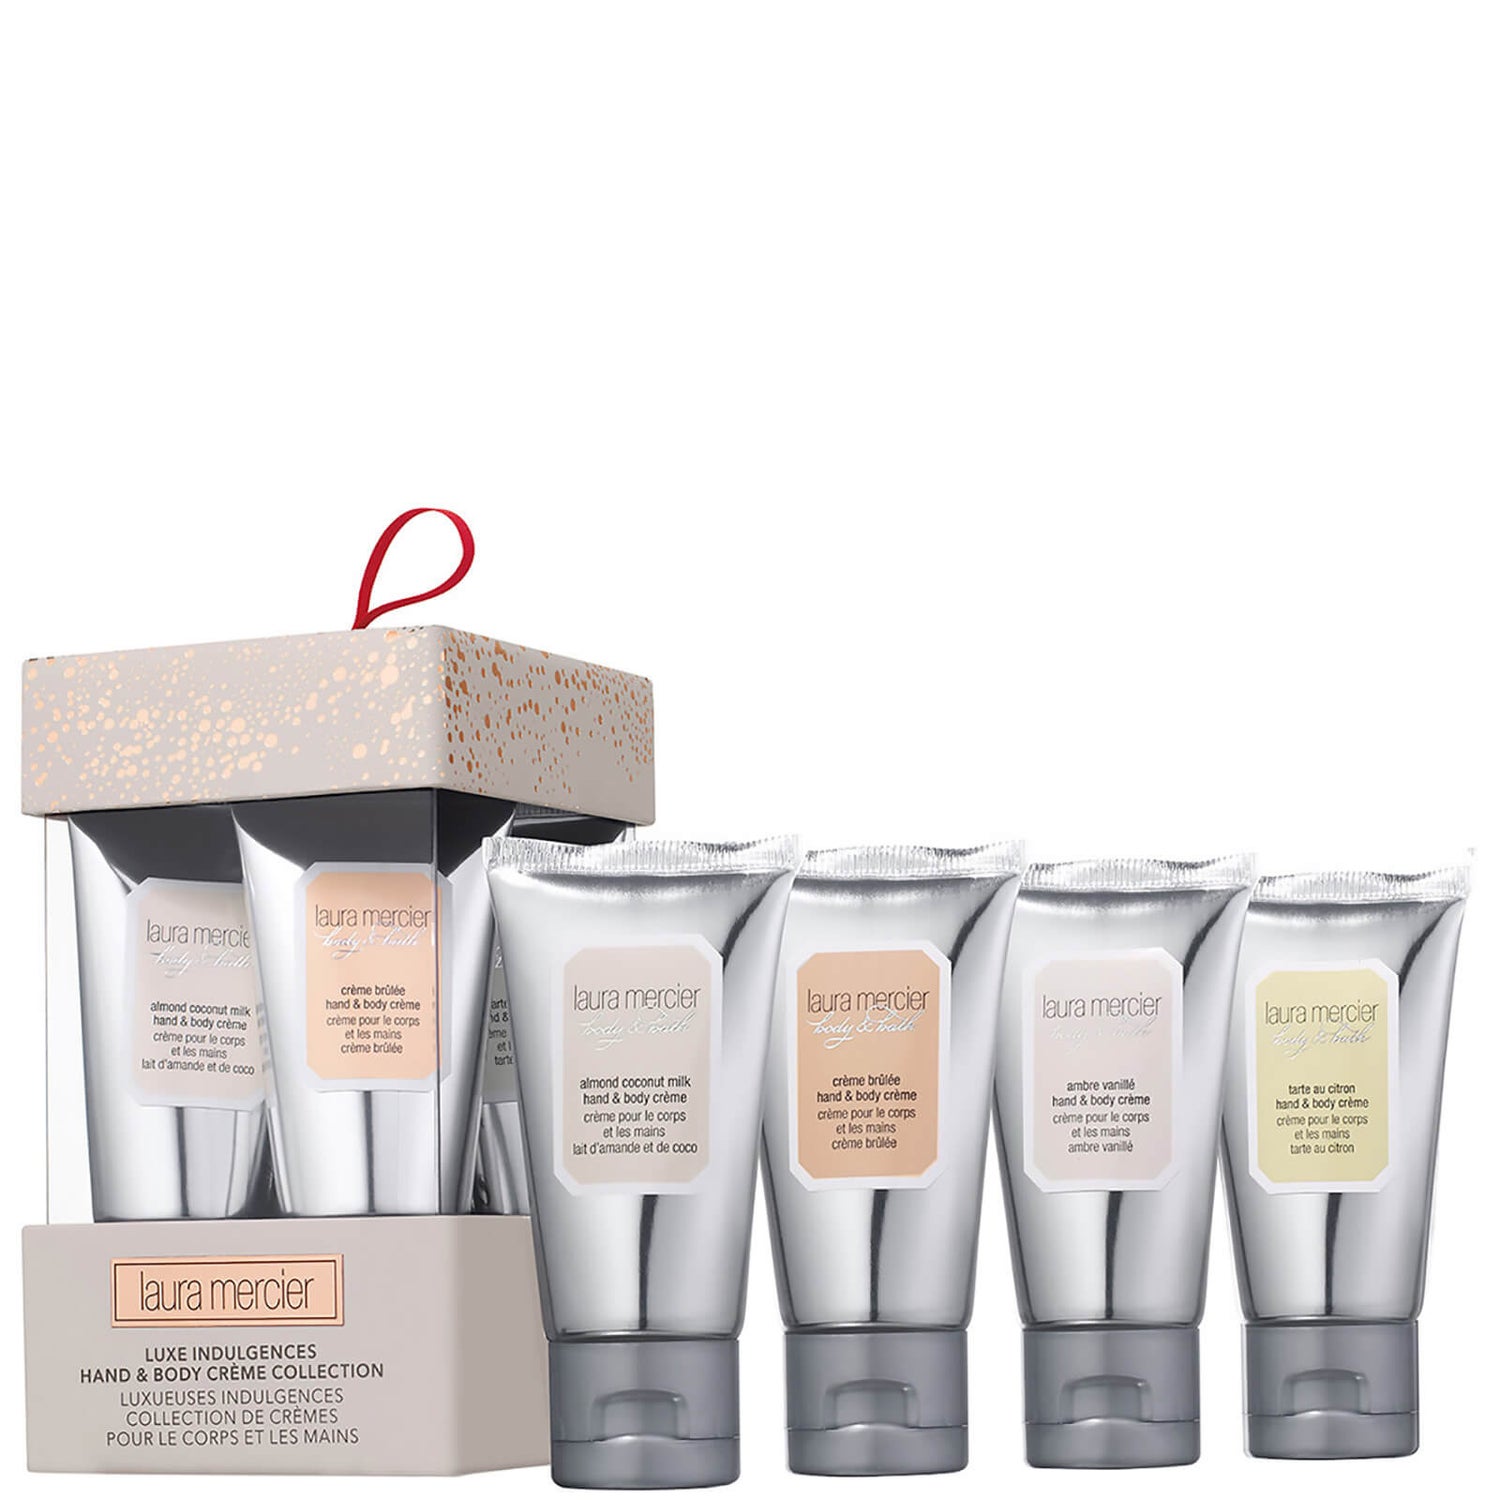 Laura Mercier Luxe Indulgences Hand & Body Crème Collection